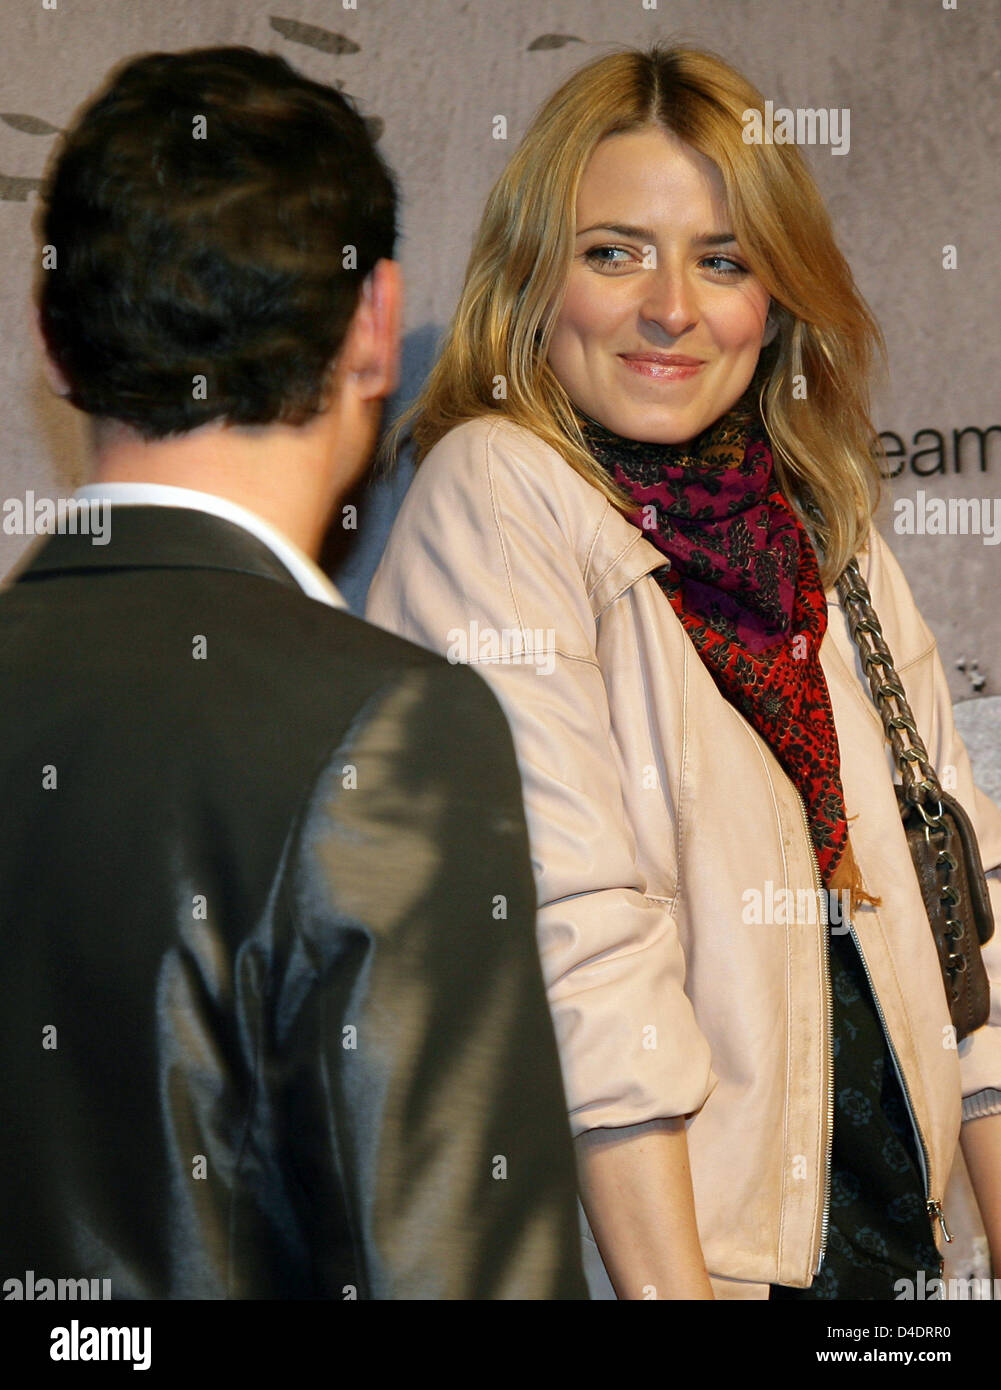 German top model Eva Padberg (R) and actor Erhan Emre (L) arrive for the premiere of German crime series 'Unschuldig' (Innocent) in Berlin, Germany, 16 April 2008. The series will be broadcasted weekly by German private TV station Pro7. Photo: Jens Kalaene Stock Photo